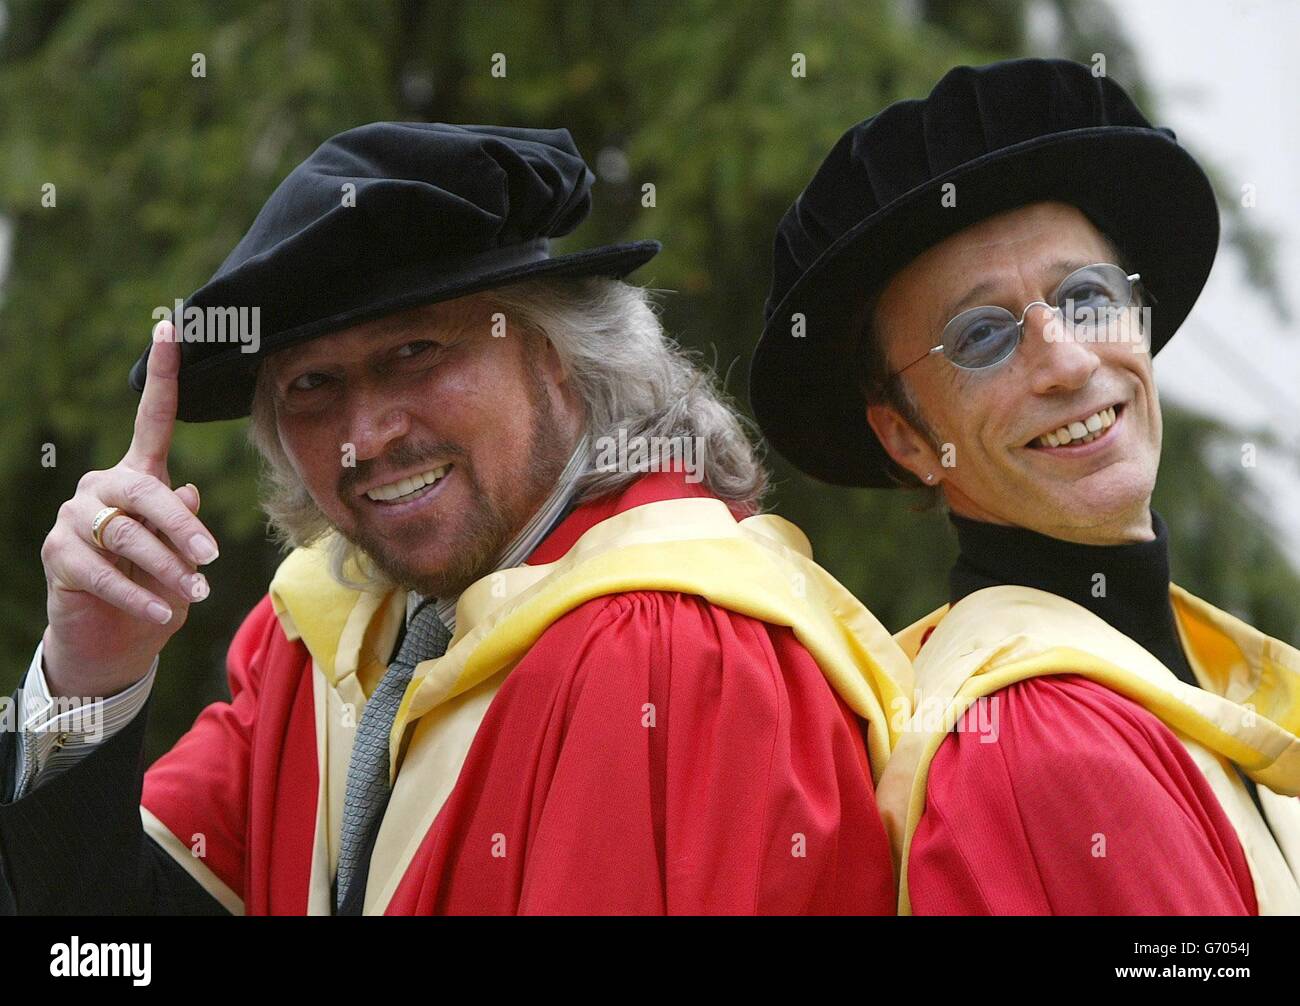 The Bee Gees, Barry (left) and Robin Gibb pose for photographers after recieving honorary degree's (Doctor of Music) at The University of Manchester. The brothers also accepted a posthumous Honorary Degree on behalf of their late brother Maurice, who died in January 2003. Stock Photo